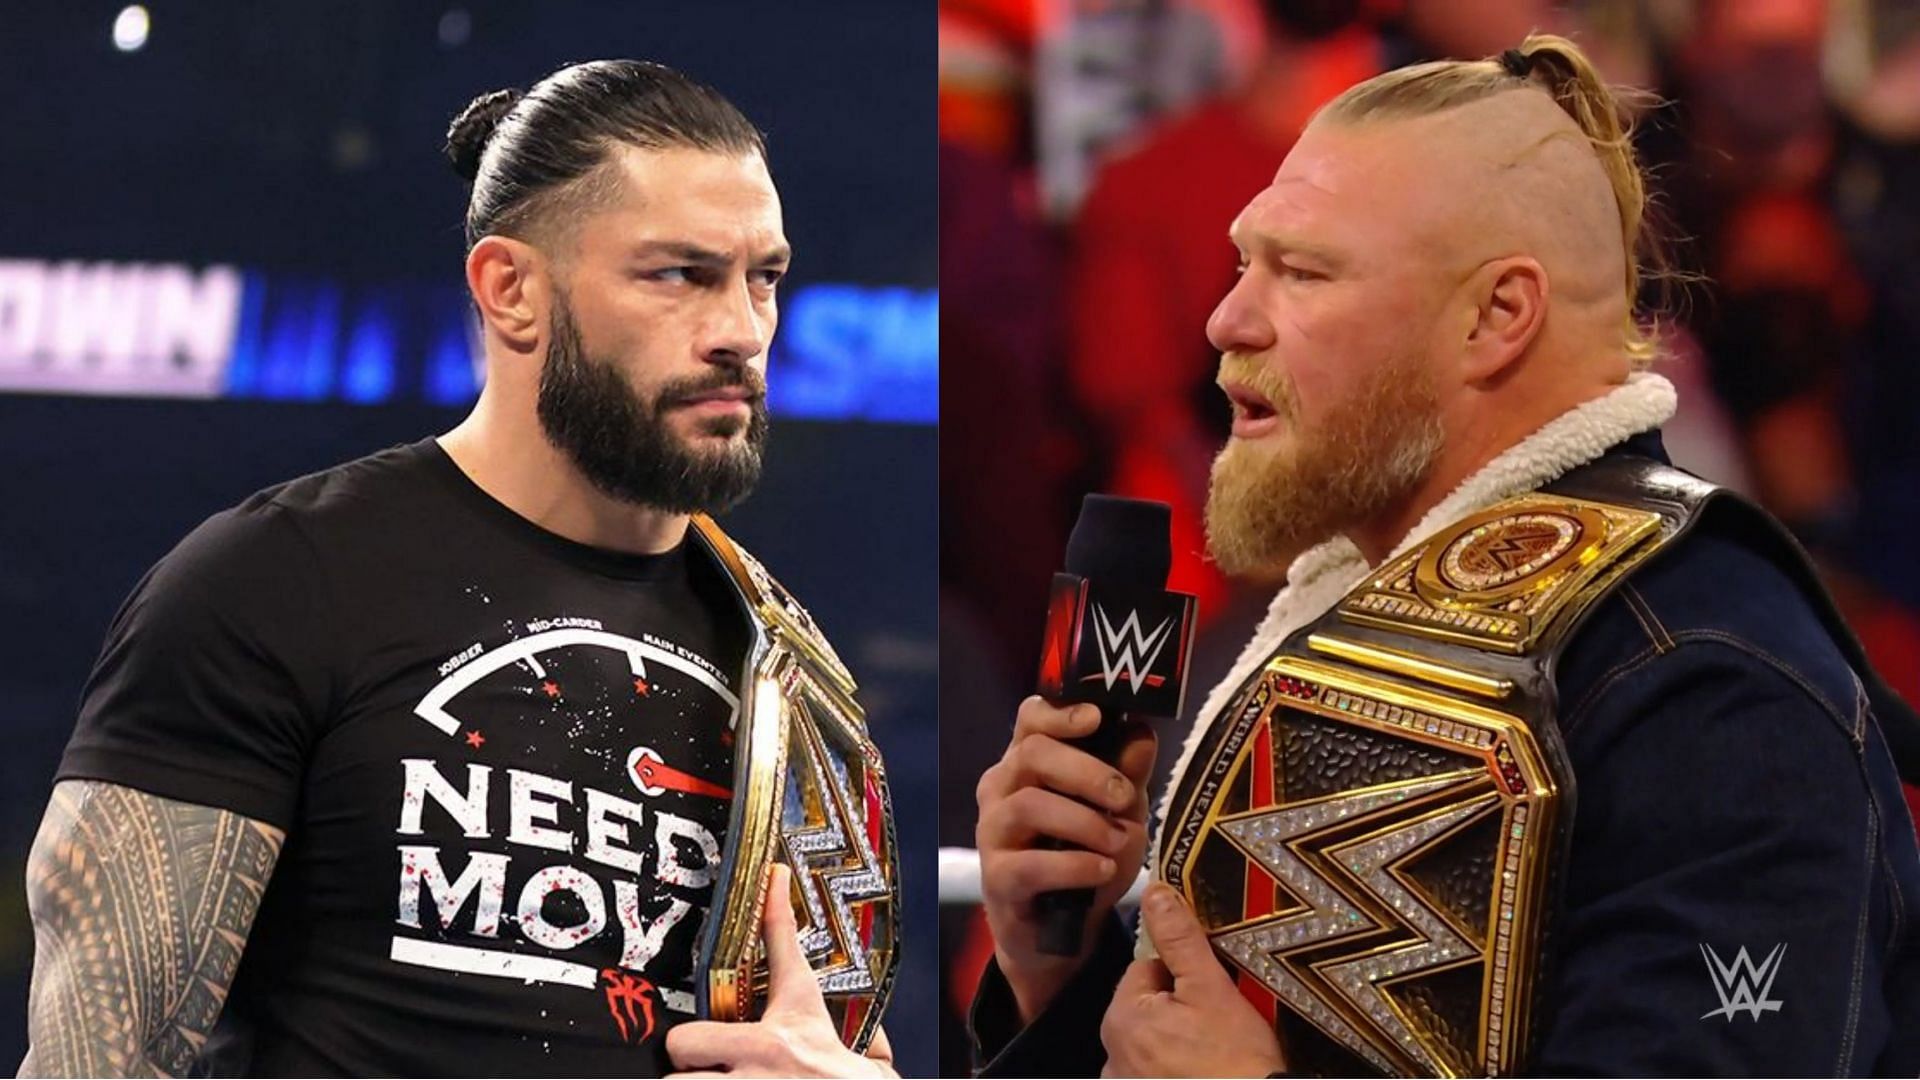 Reigns and Lesnar could be on a collision course soon.